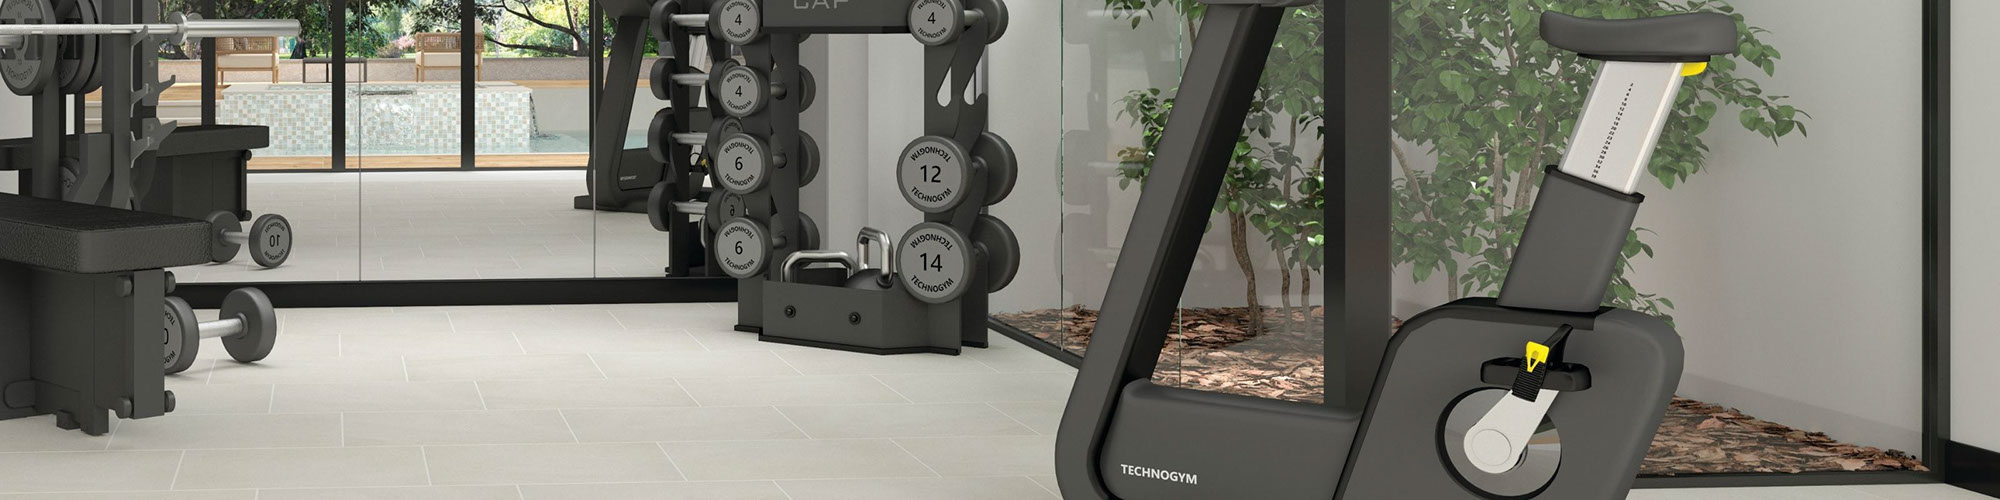 Home gym with cycling machine, free weights, mirrored wall, and off-white floor tile that looks like stone.